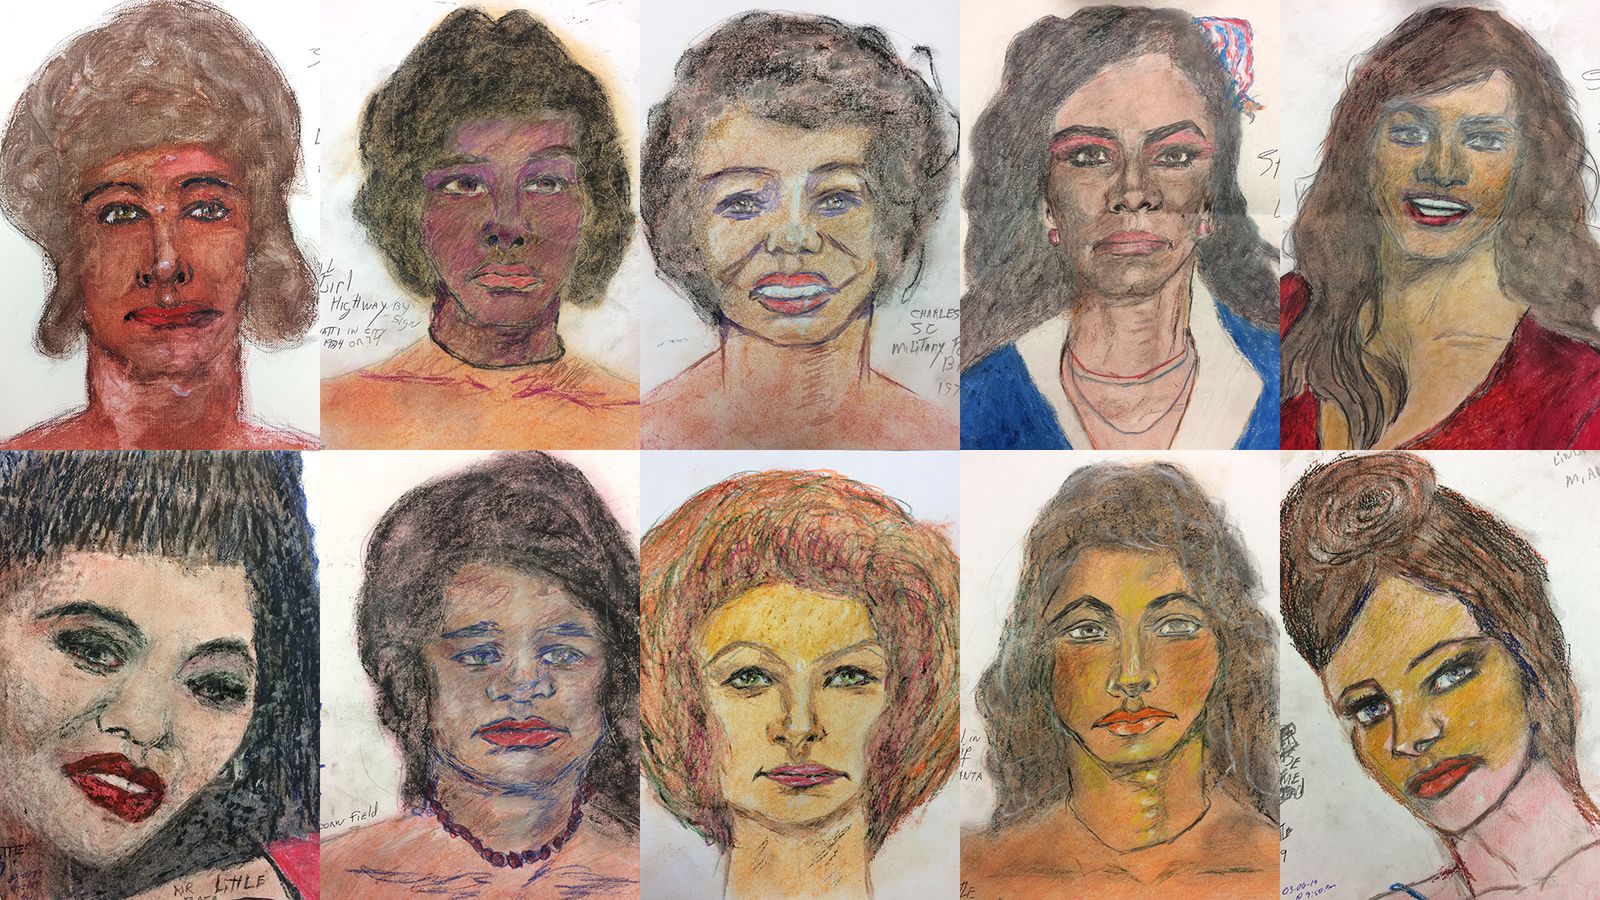 Serial killer sketches 10 more unidentified victims as FBI appeals for